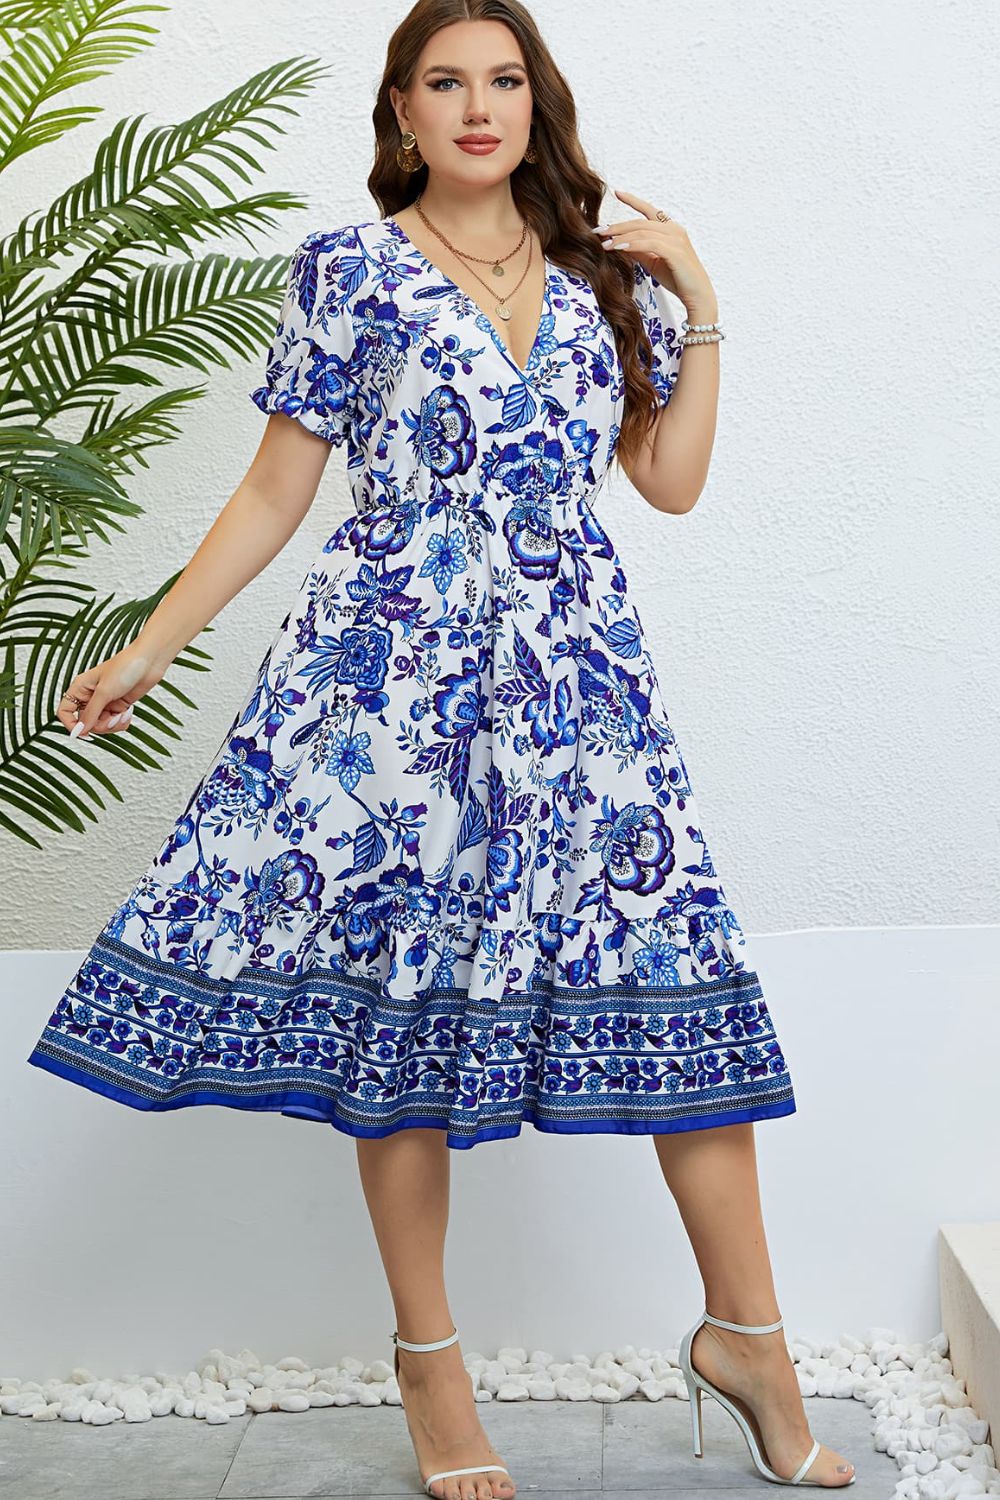 Floral Flounce Sleeve Surplice Dress - Online Only